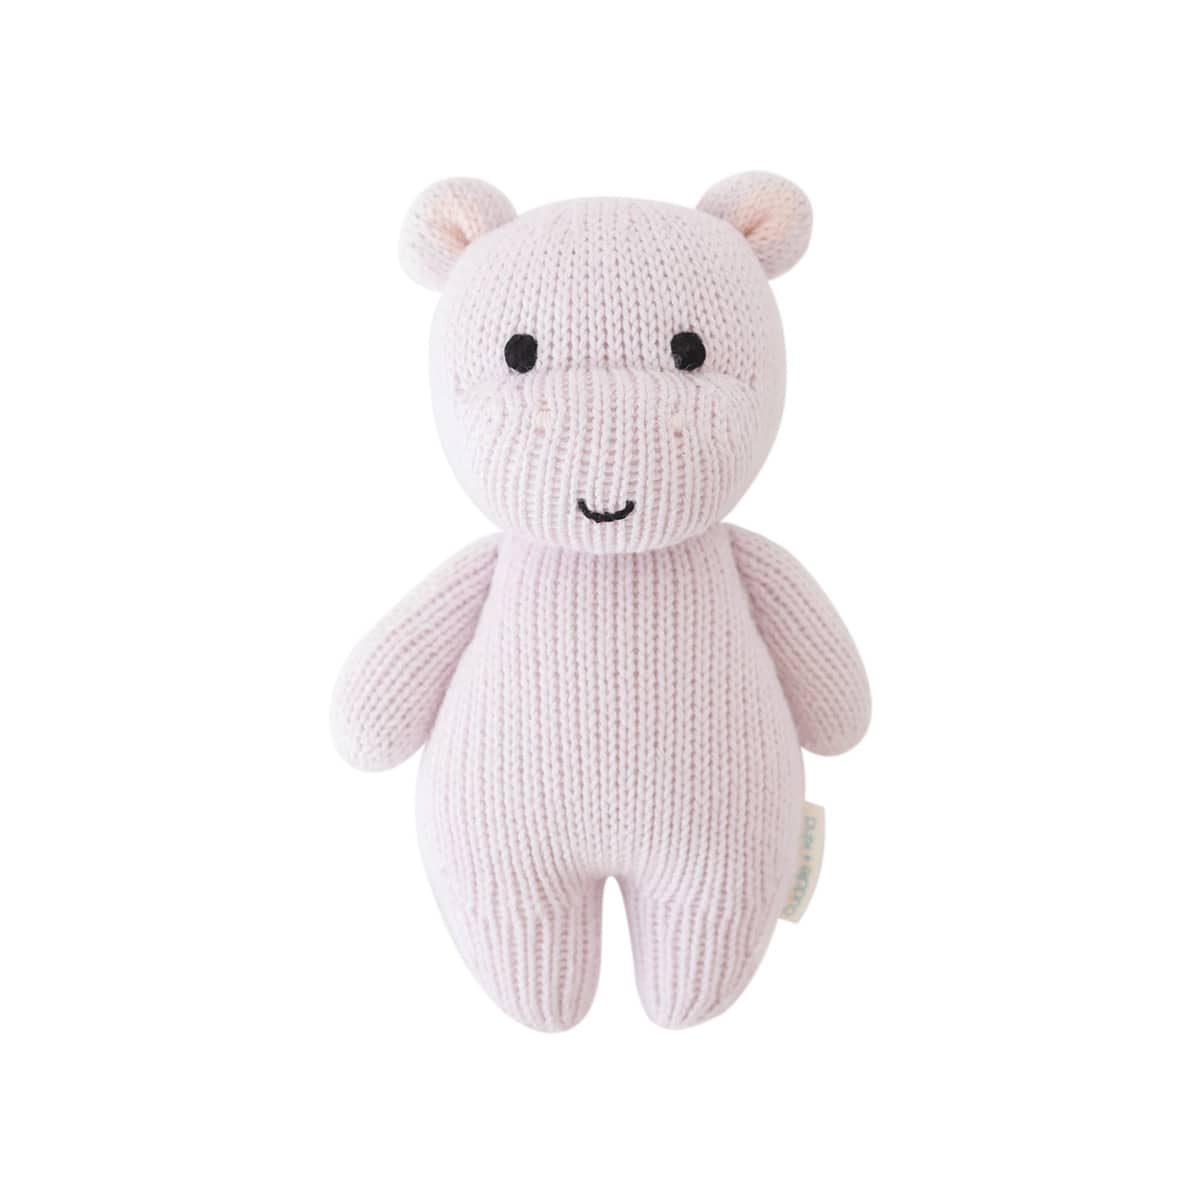 Cuddle + Kind Hand-Knit Doll - Baby Hippo (lavender)